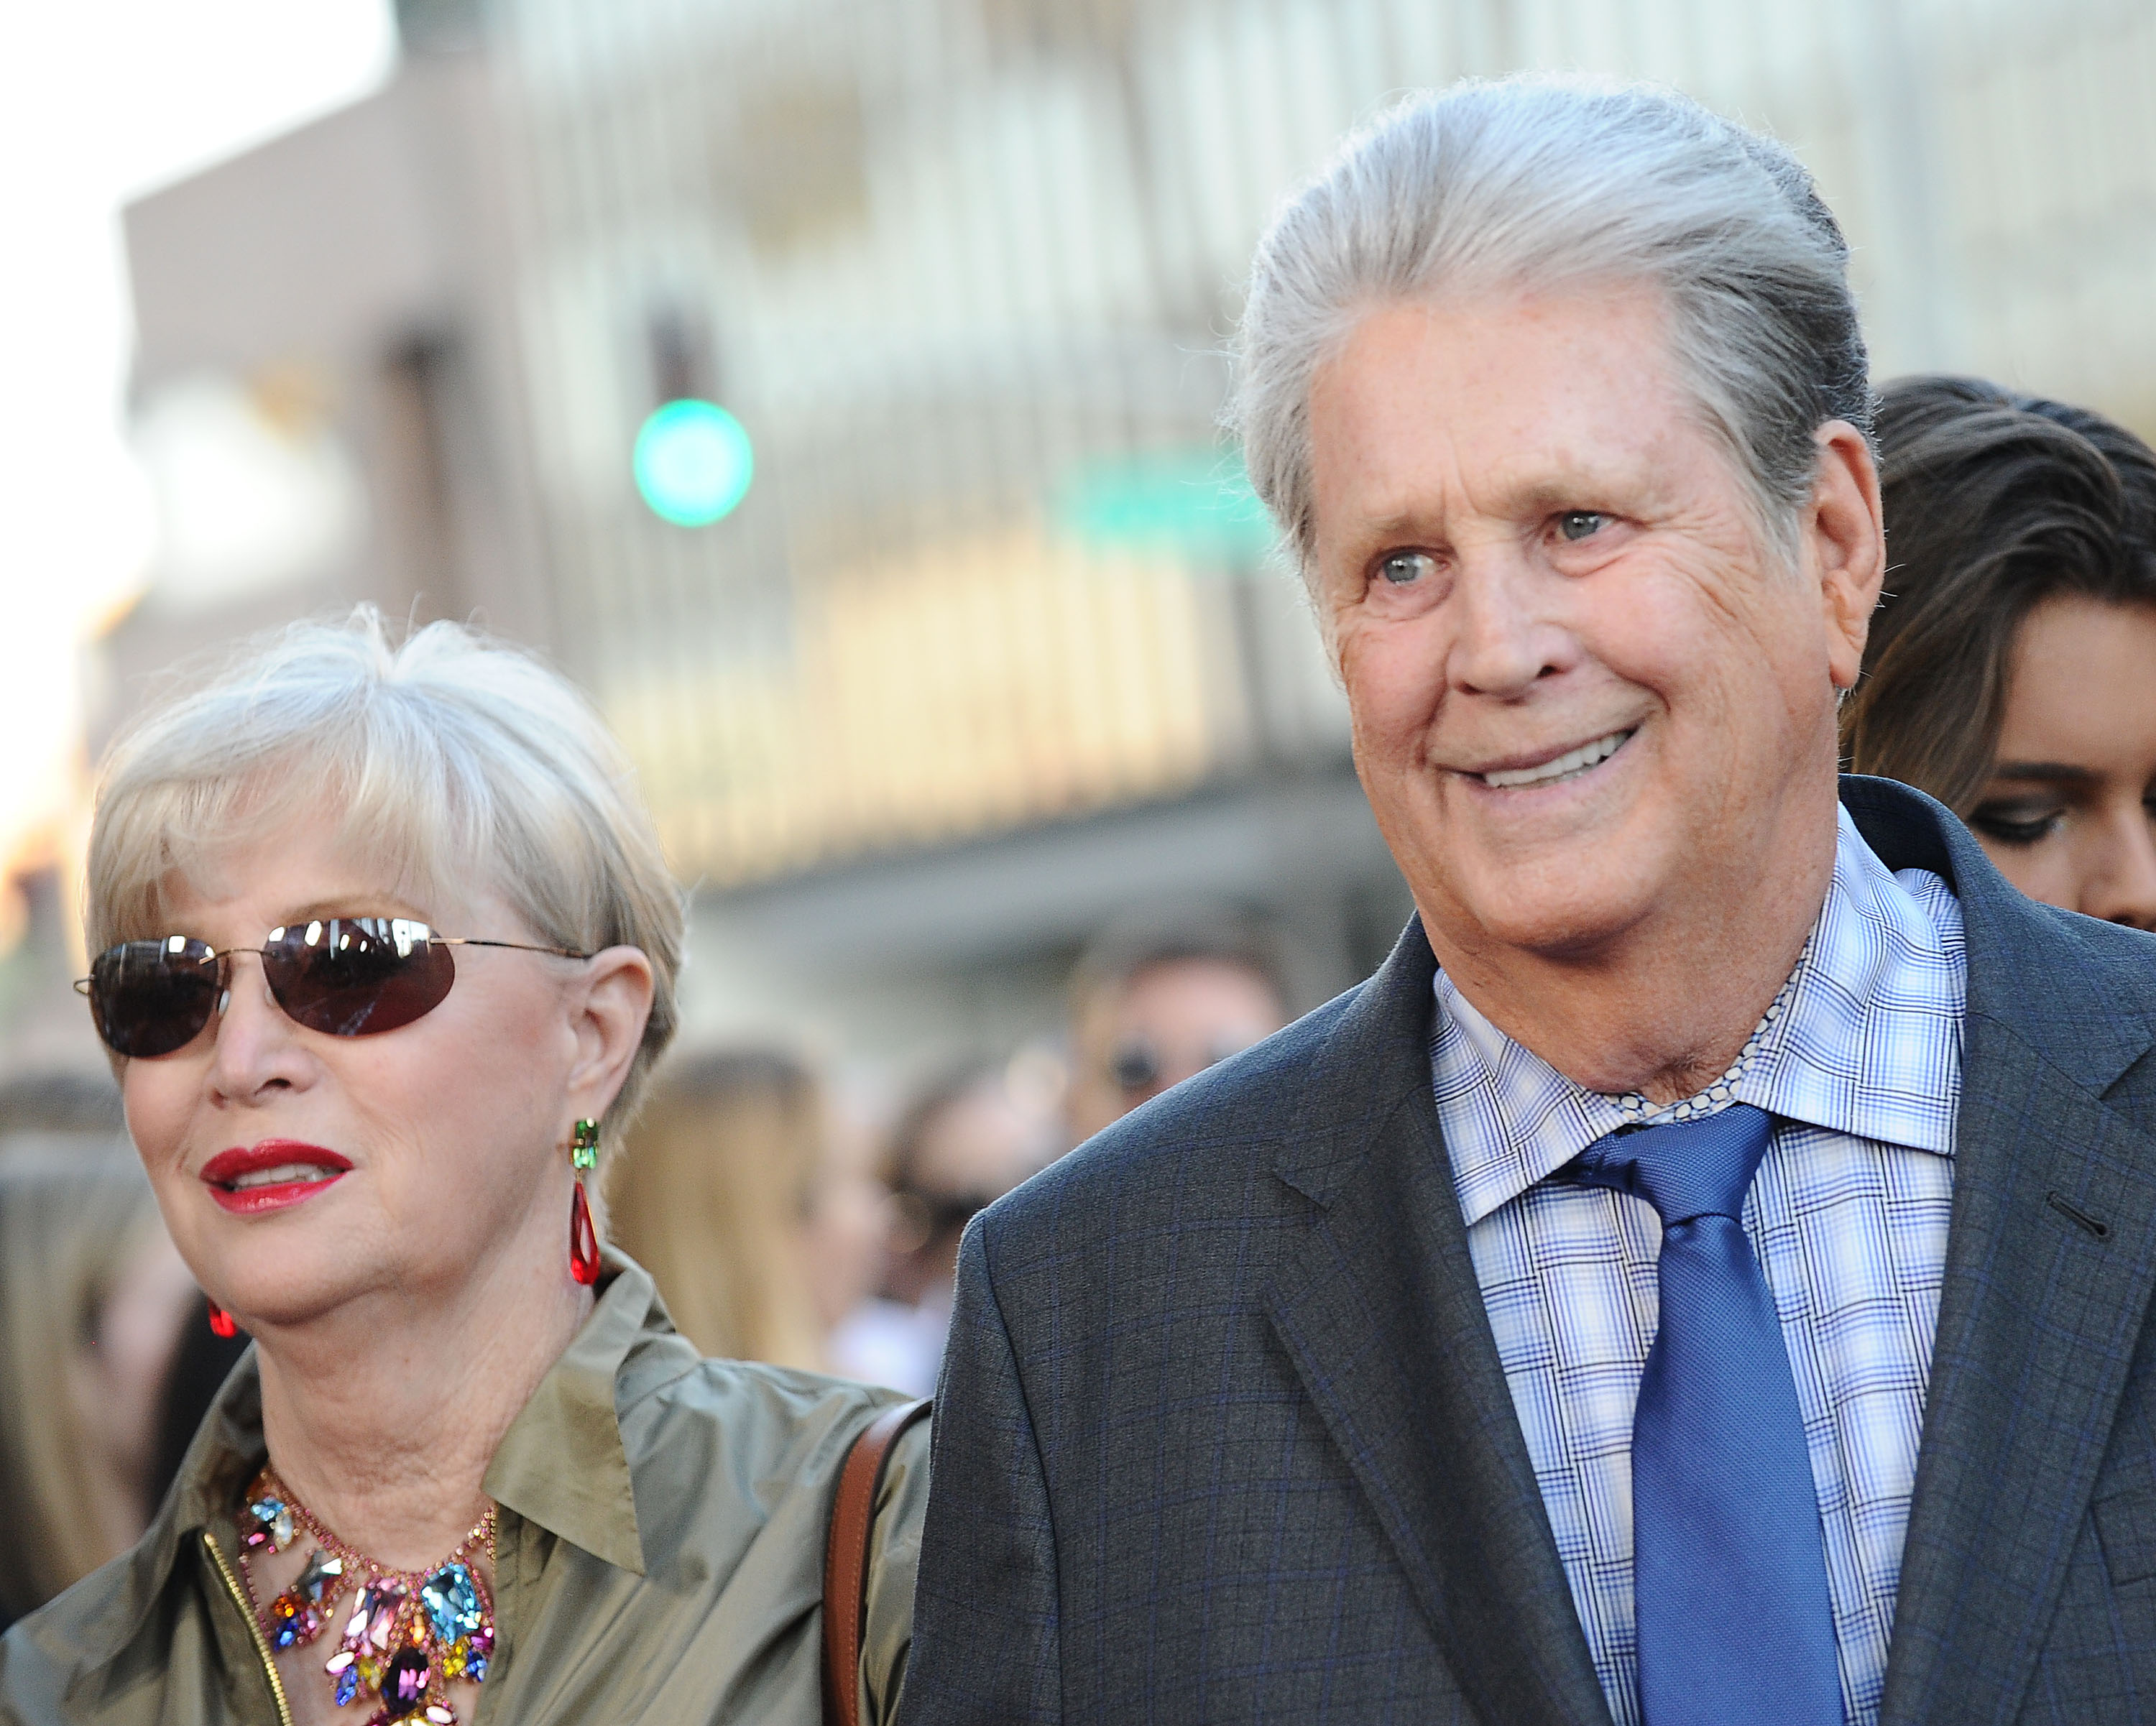 Brian Wilson and Melinda Wilson at the premiere of "Love & Mercy" on June 2, 2015, in Beverly Hills, California. | Source: Getty Images